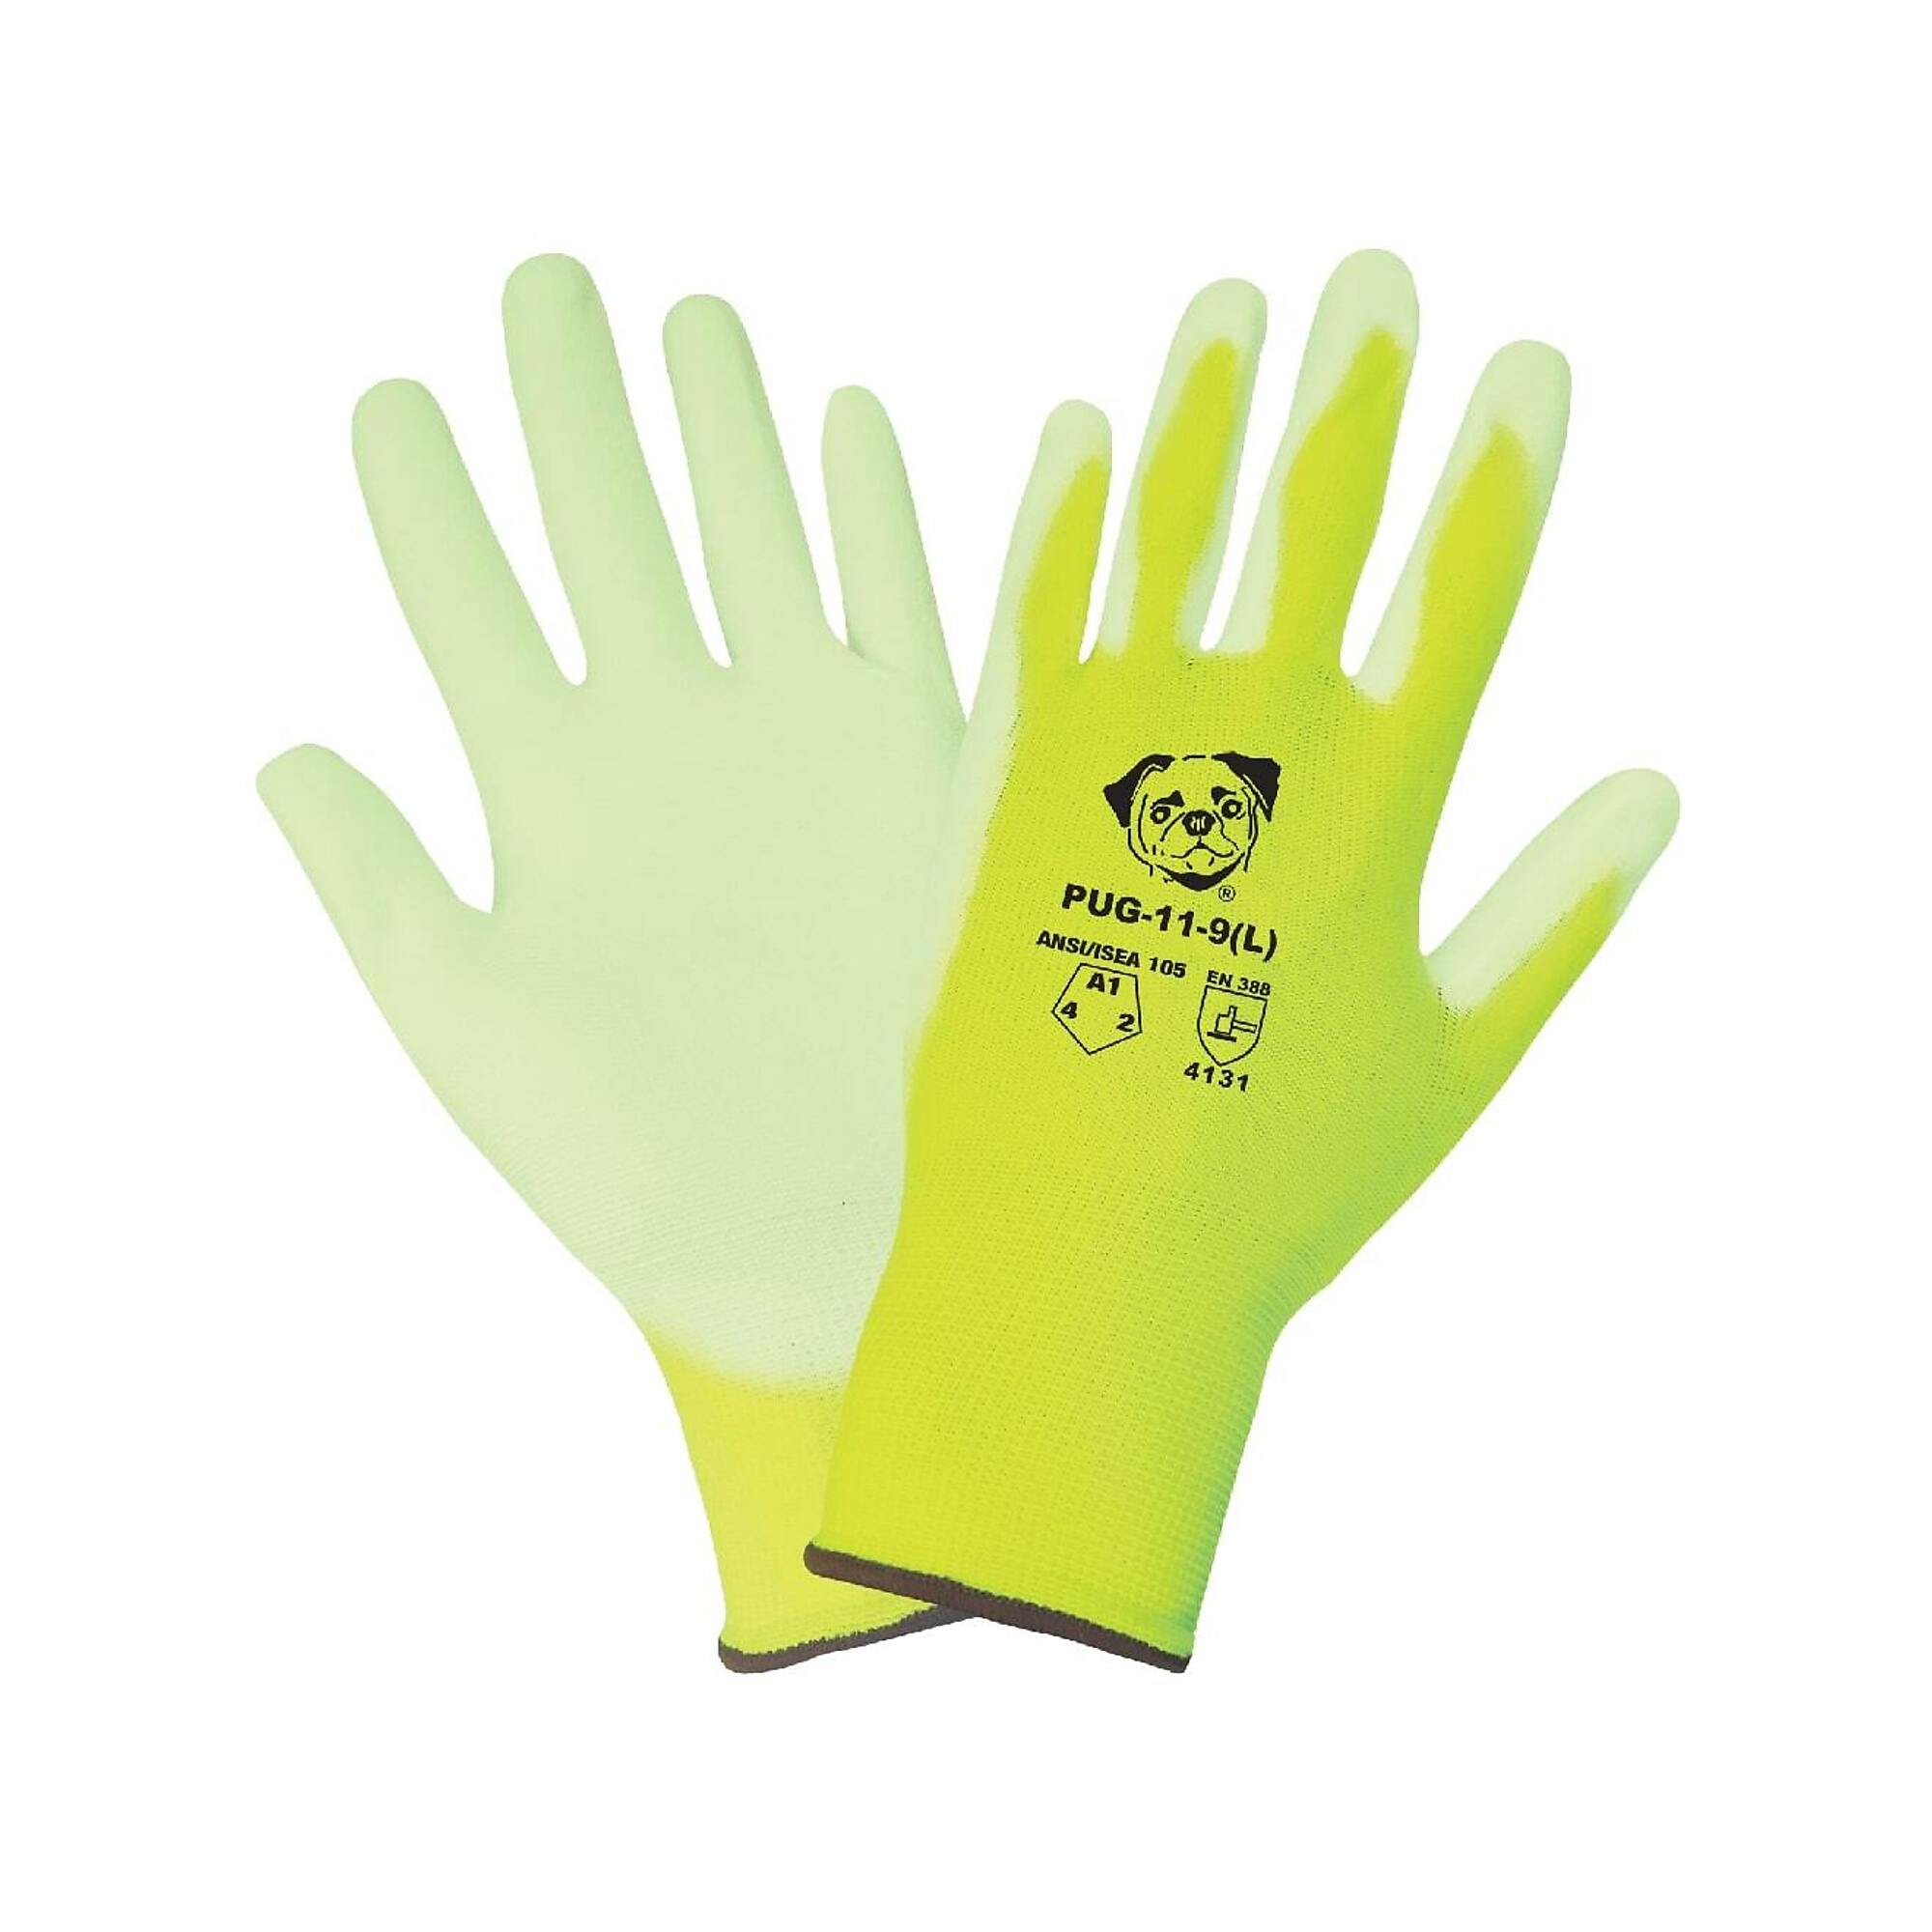 Global Glove PUG , HV Y/G, Poly Coated, Cut Resistant A1 Gloves - 12 Pairs, Size XL, Color High-Visibility Yellow/Green, Included (qty.) 12 Model PUG-